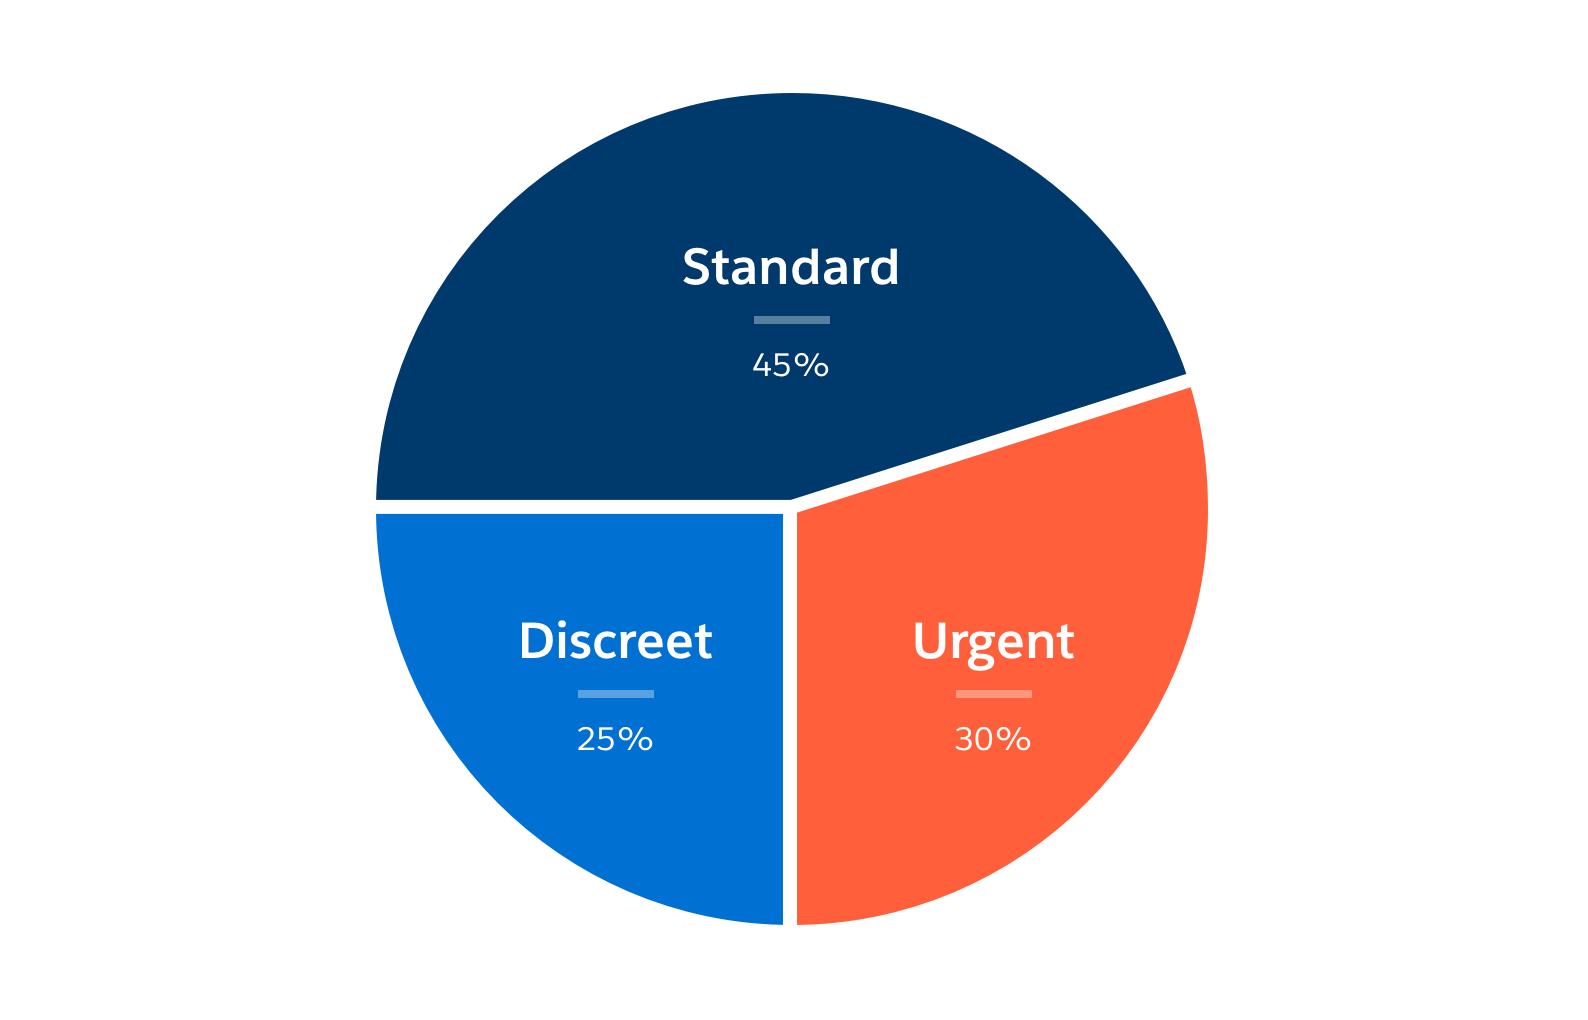 A pie chart showing the suggested distribution of standard, discreet, and urgent notifications: 45% Standard, 25% Discreet, and 30% Urgent.